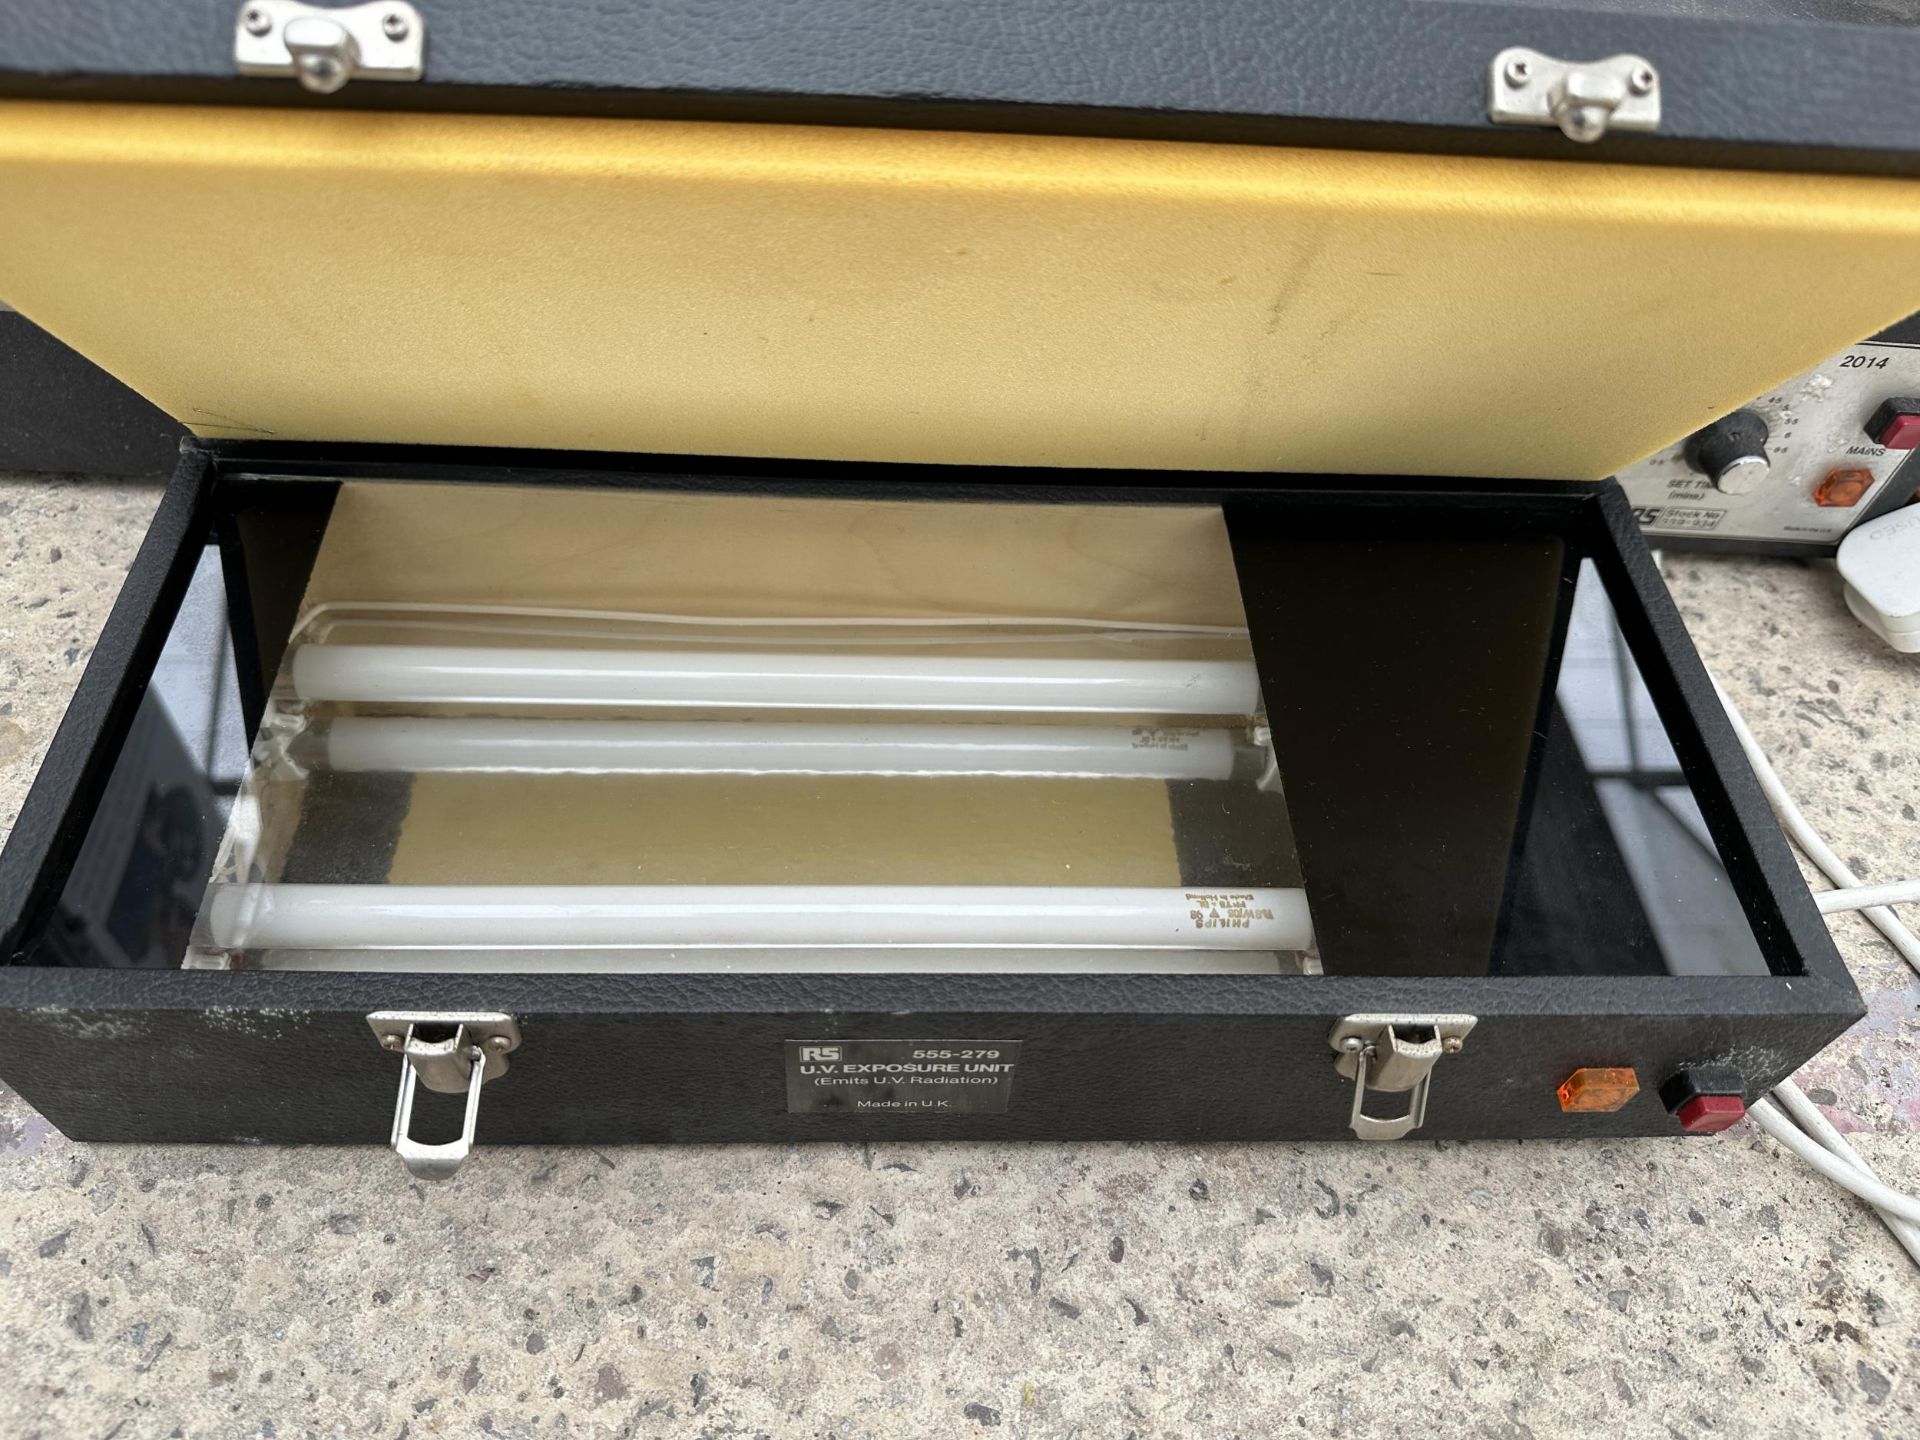 TWO UV EXPOSURE UNITS AND A RECORD PLAYER - Image 2 of 5